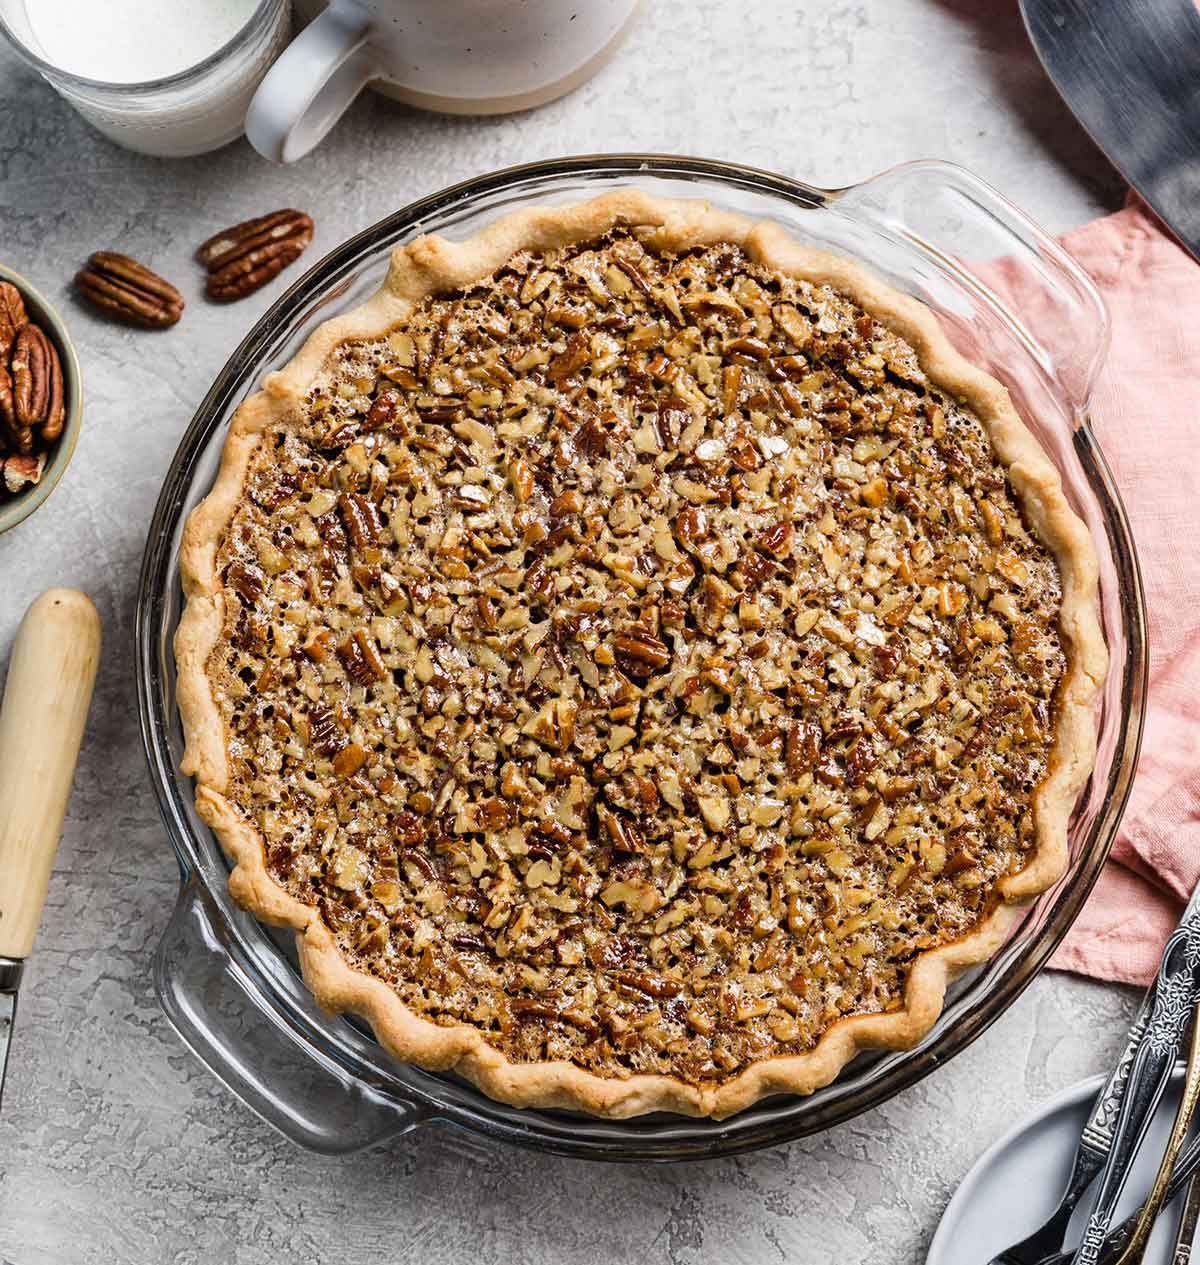 Overhead photo of baked pecan pie in a glass pie plate.